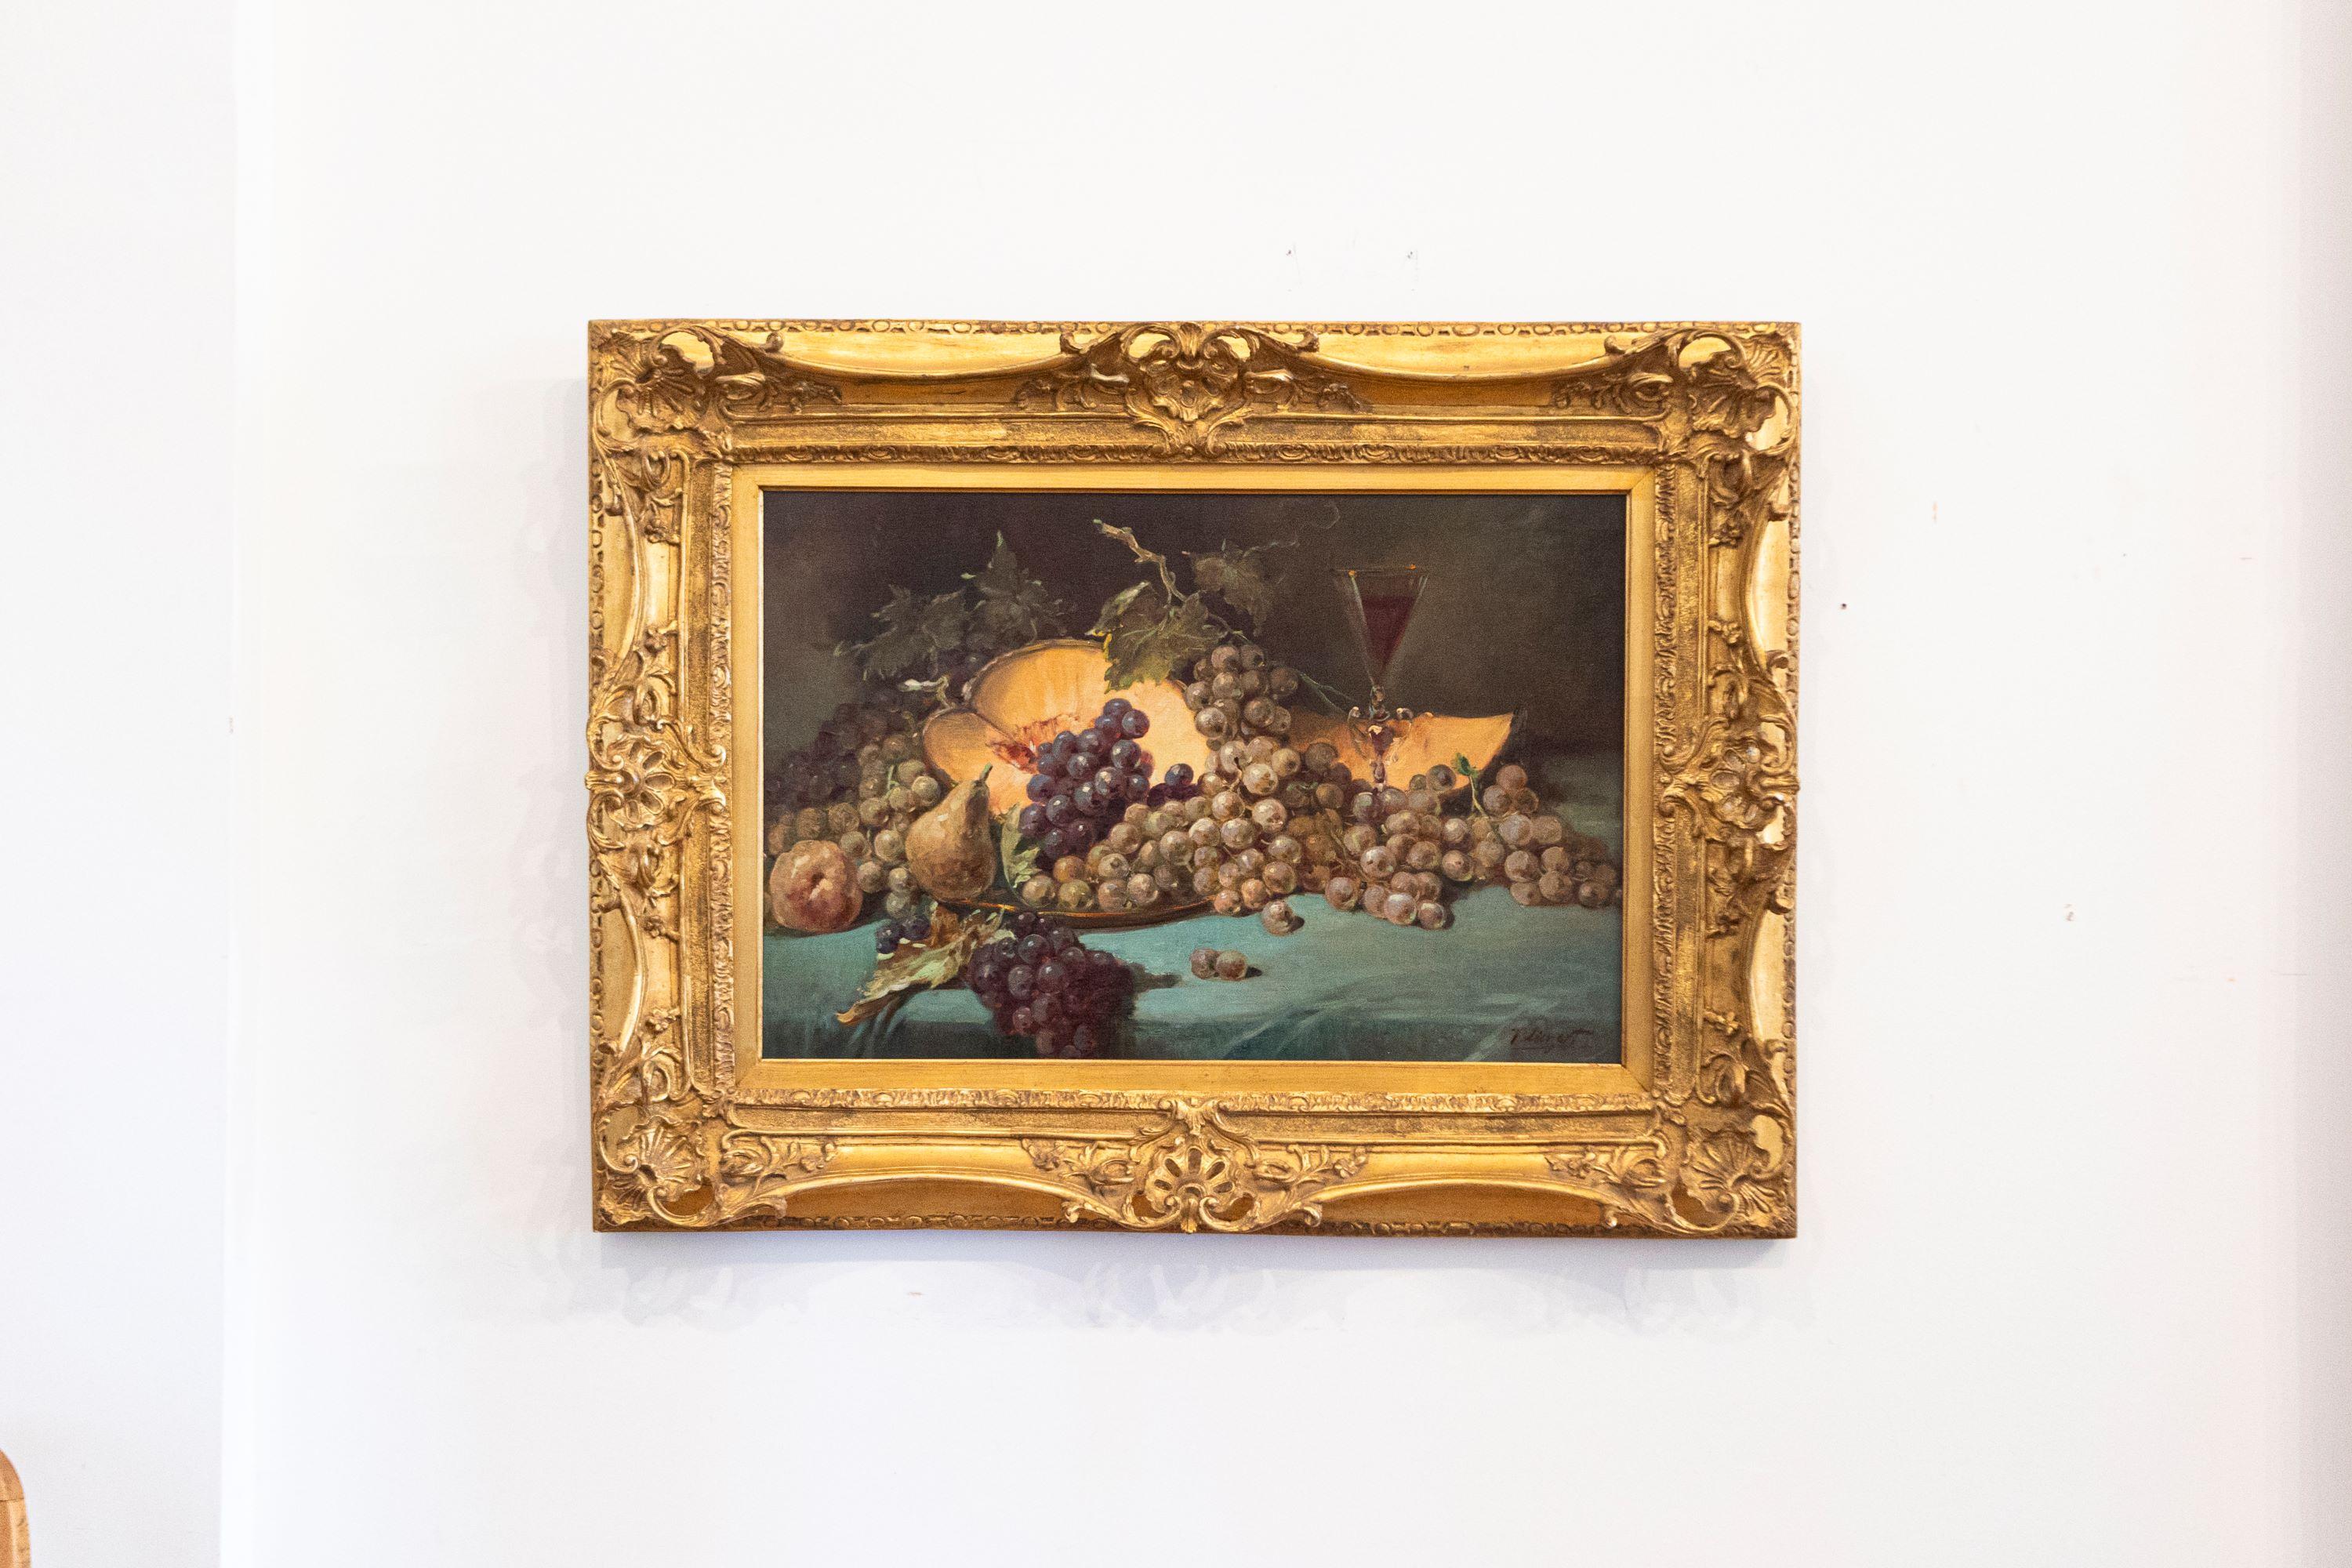 A French Napoleon III period still-life painting from the second half of the 19th century, signed and set in giltwood frame. This French still-life painting was born at the end of the reign of Emperor Napoleon III, at a time when France was losing